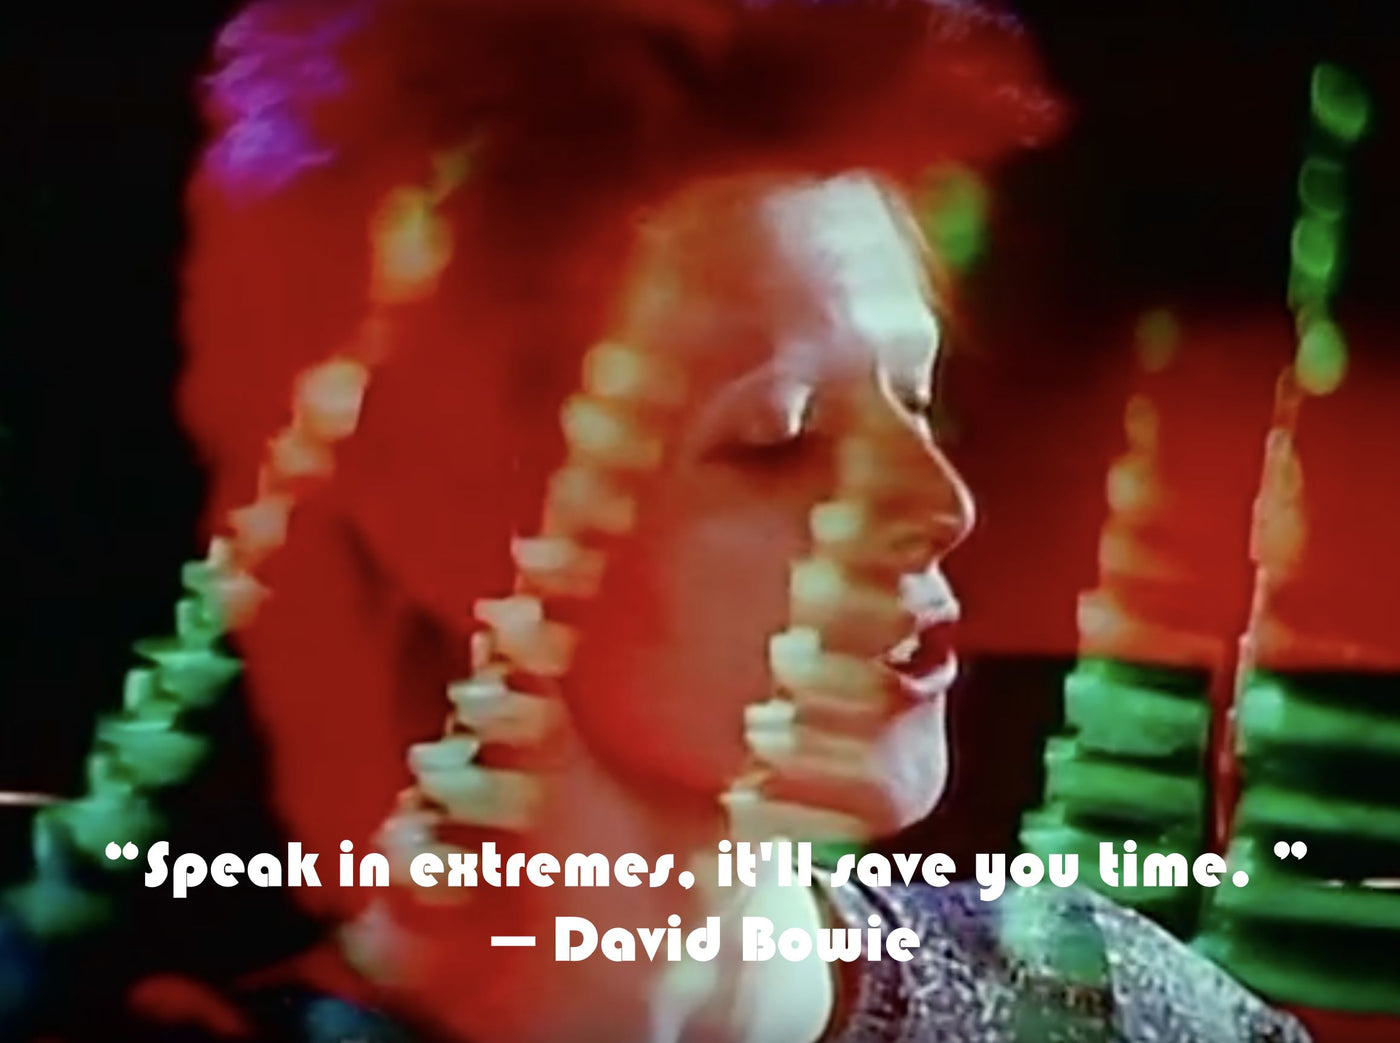 BOWIE QUOTES "Speak in extremes, it'll save you time"